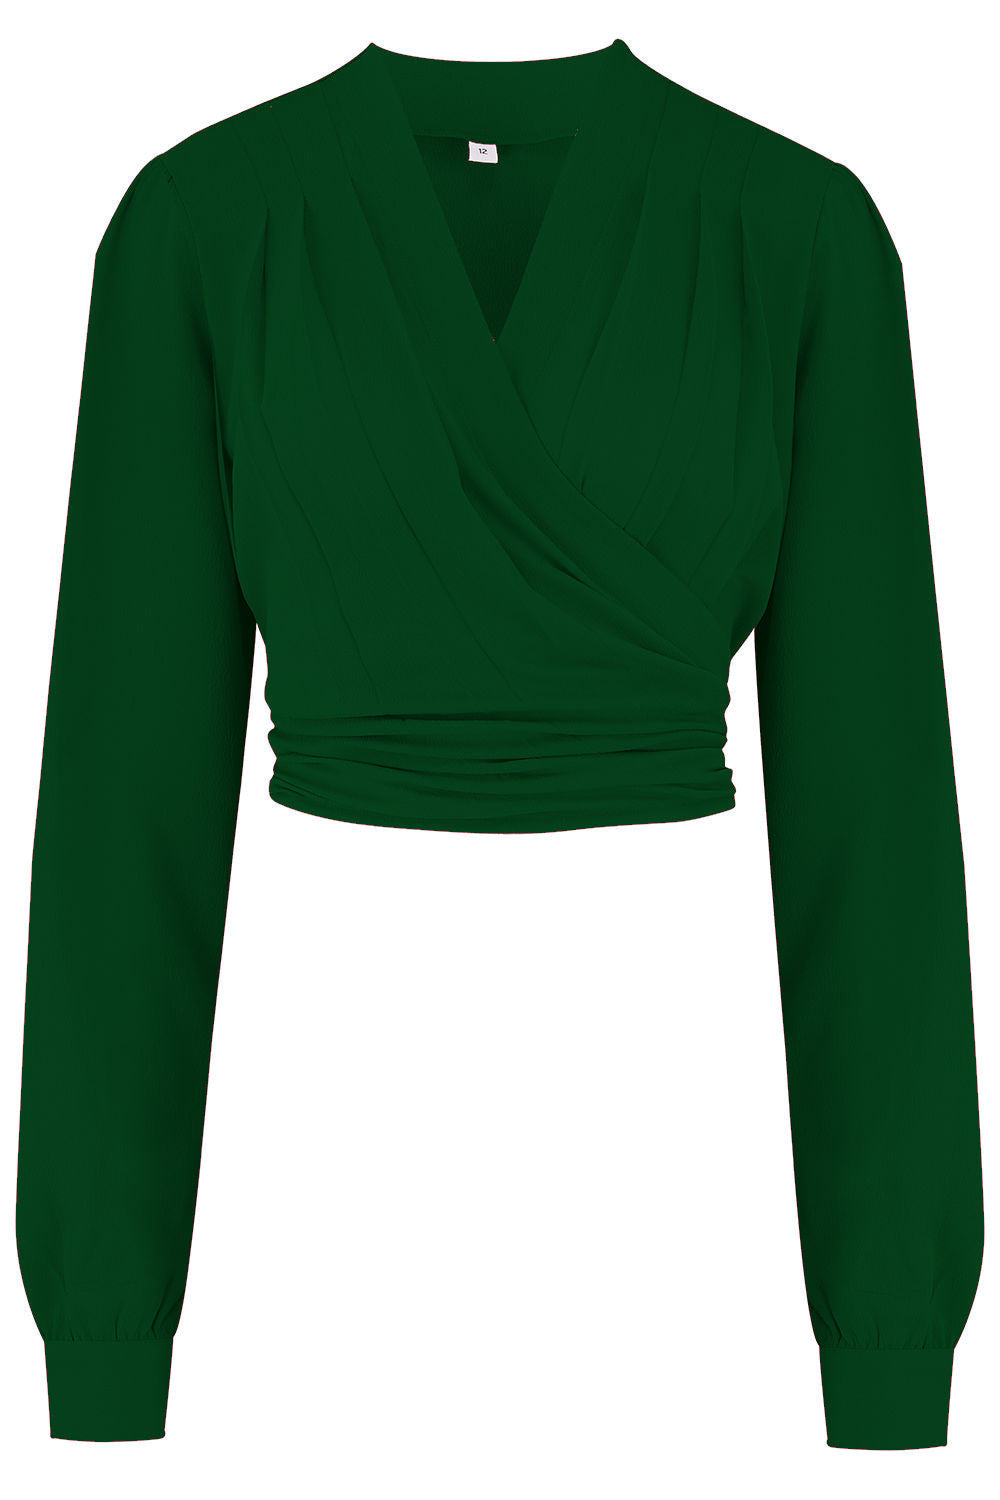 The "Darla" Long Sleeve Wrap Blouse in Green, True Vintage Style - True and authentic vintage style clothing, inspired by the Classic styles of CC41 , WW2 and the fun 1950s RocknRoll era, for everyday wear plus events like Goodwood Revival, Twinwood Festival and Viva Las Vegas Rockabilly Weekend Rock n Romance Rock n Romance